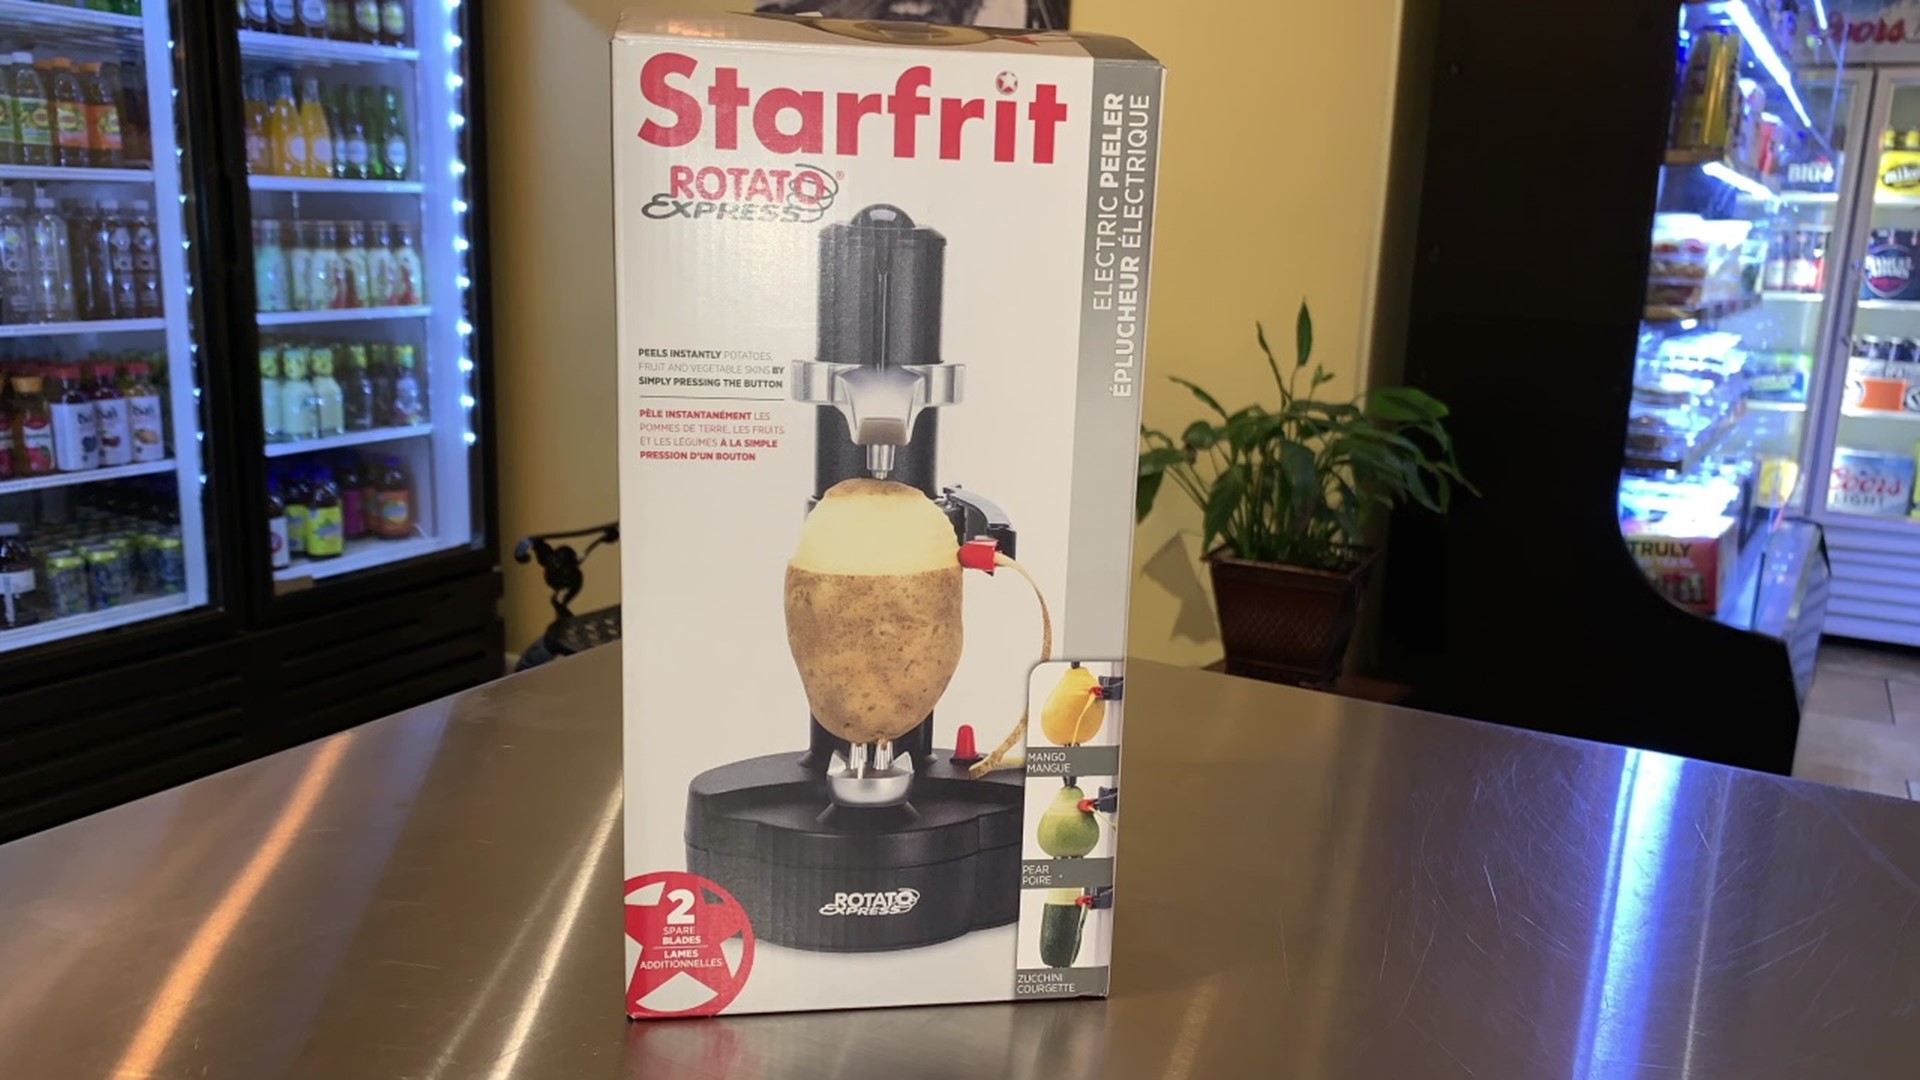 It's a new peeling machine that automatically peels away potato skins, fruits, and other vegetables in just seconds, according to the manufacturer.